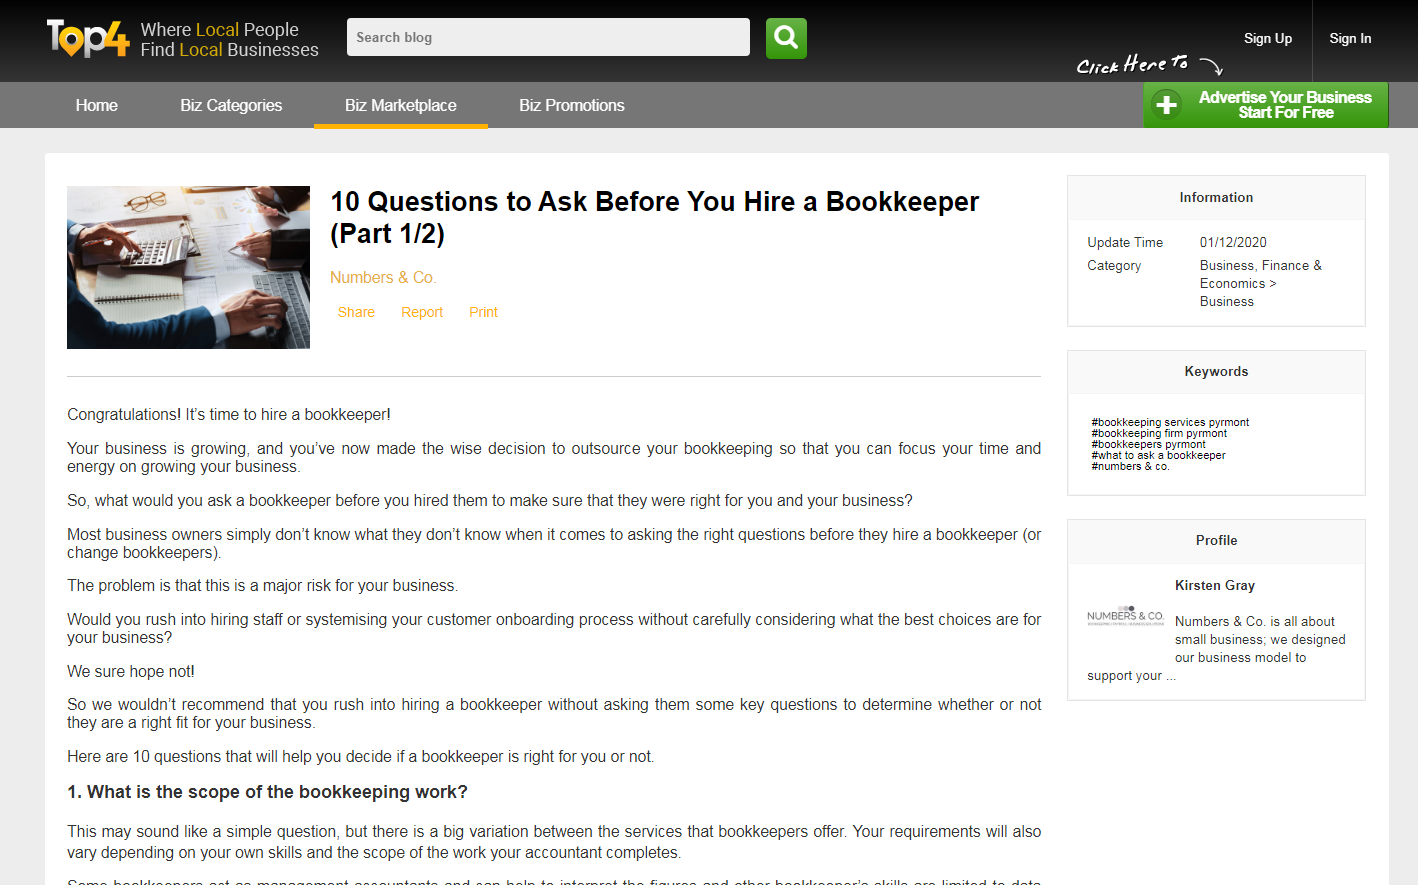 Questions to ask before hiring a bookkeeper - Top4 Press Release - Top4 Marketing